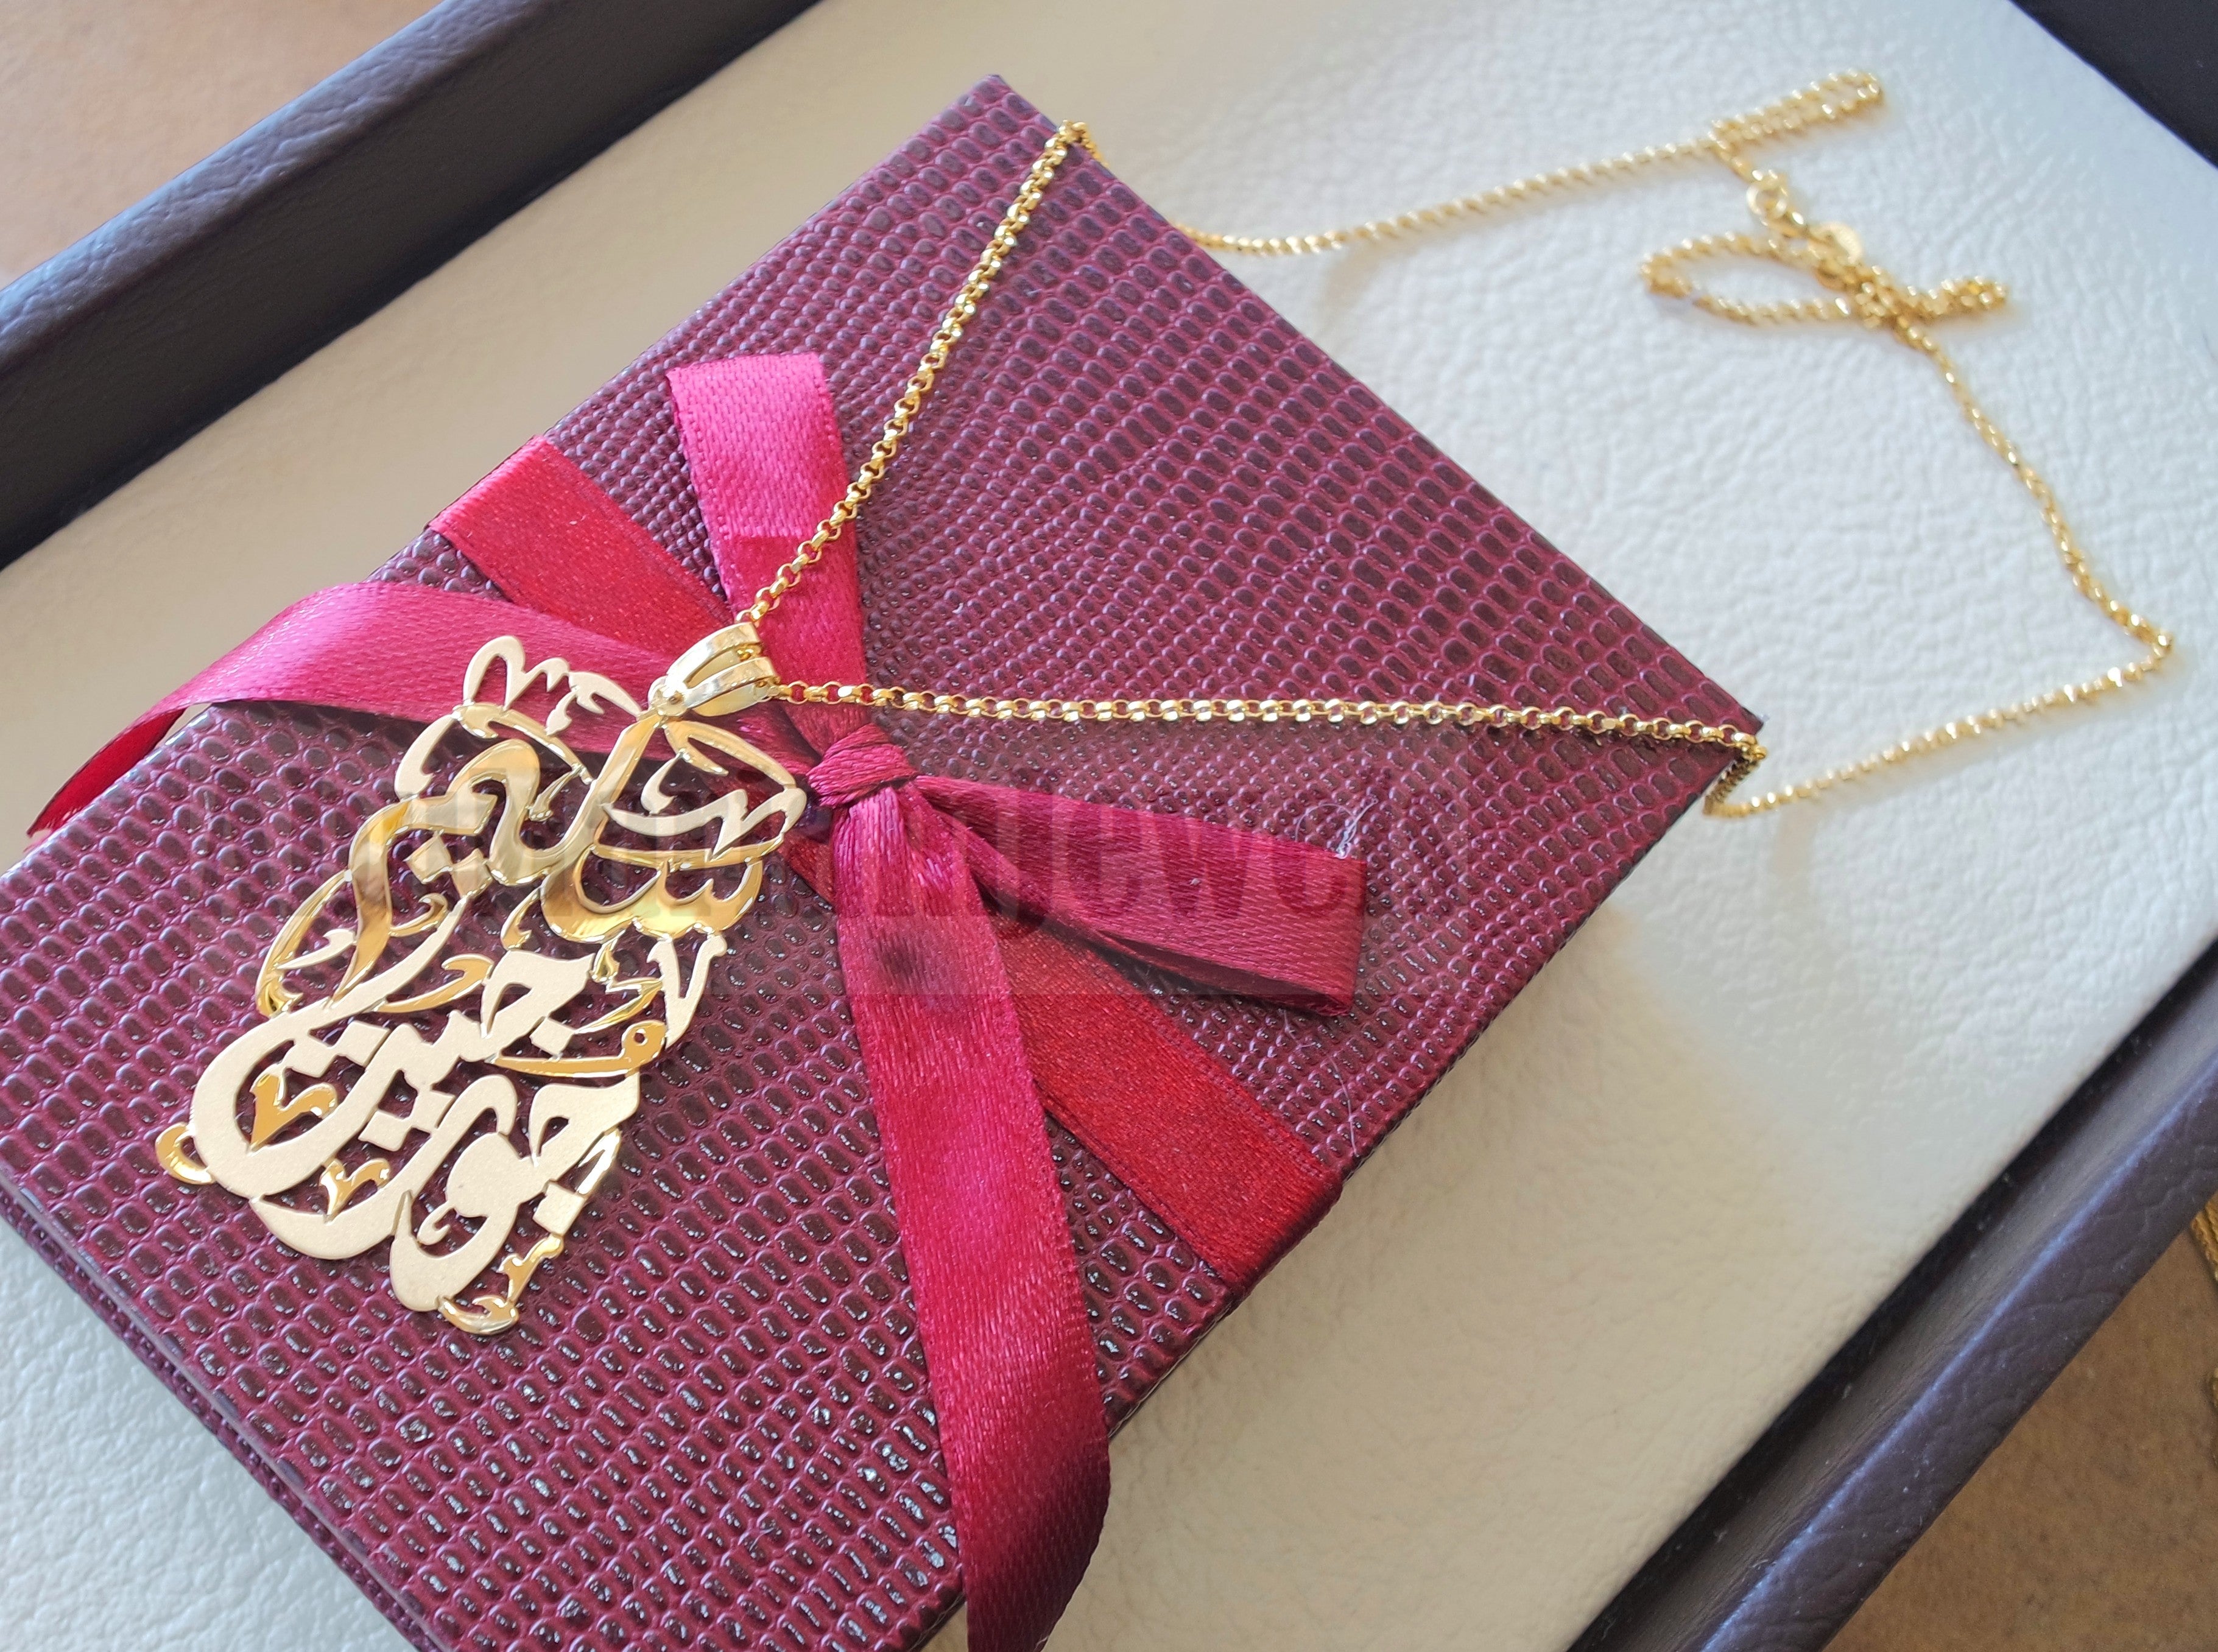 personalized customized 2 names 18 k gold arabic calligraphy pendant with chain pear , round rectangular or any shape fine jewelry S2-002